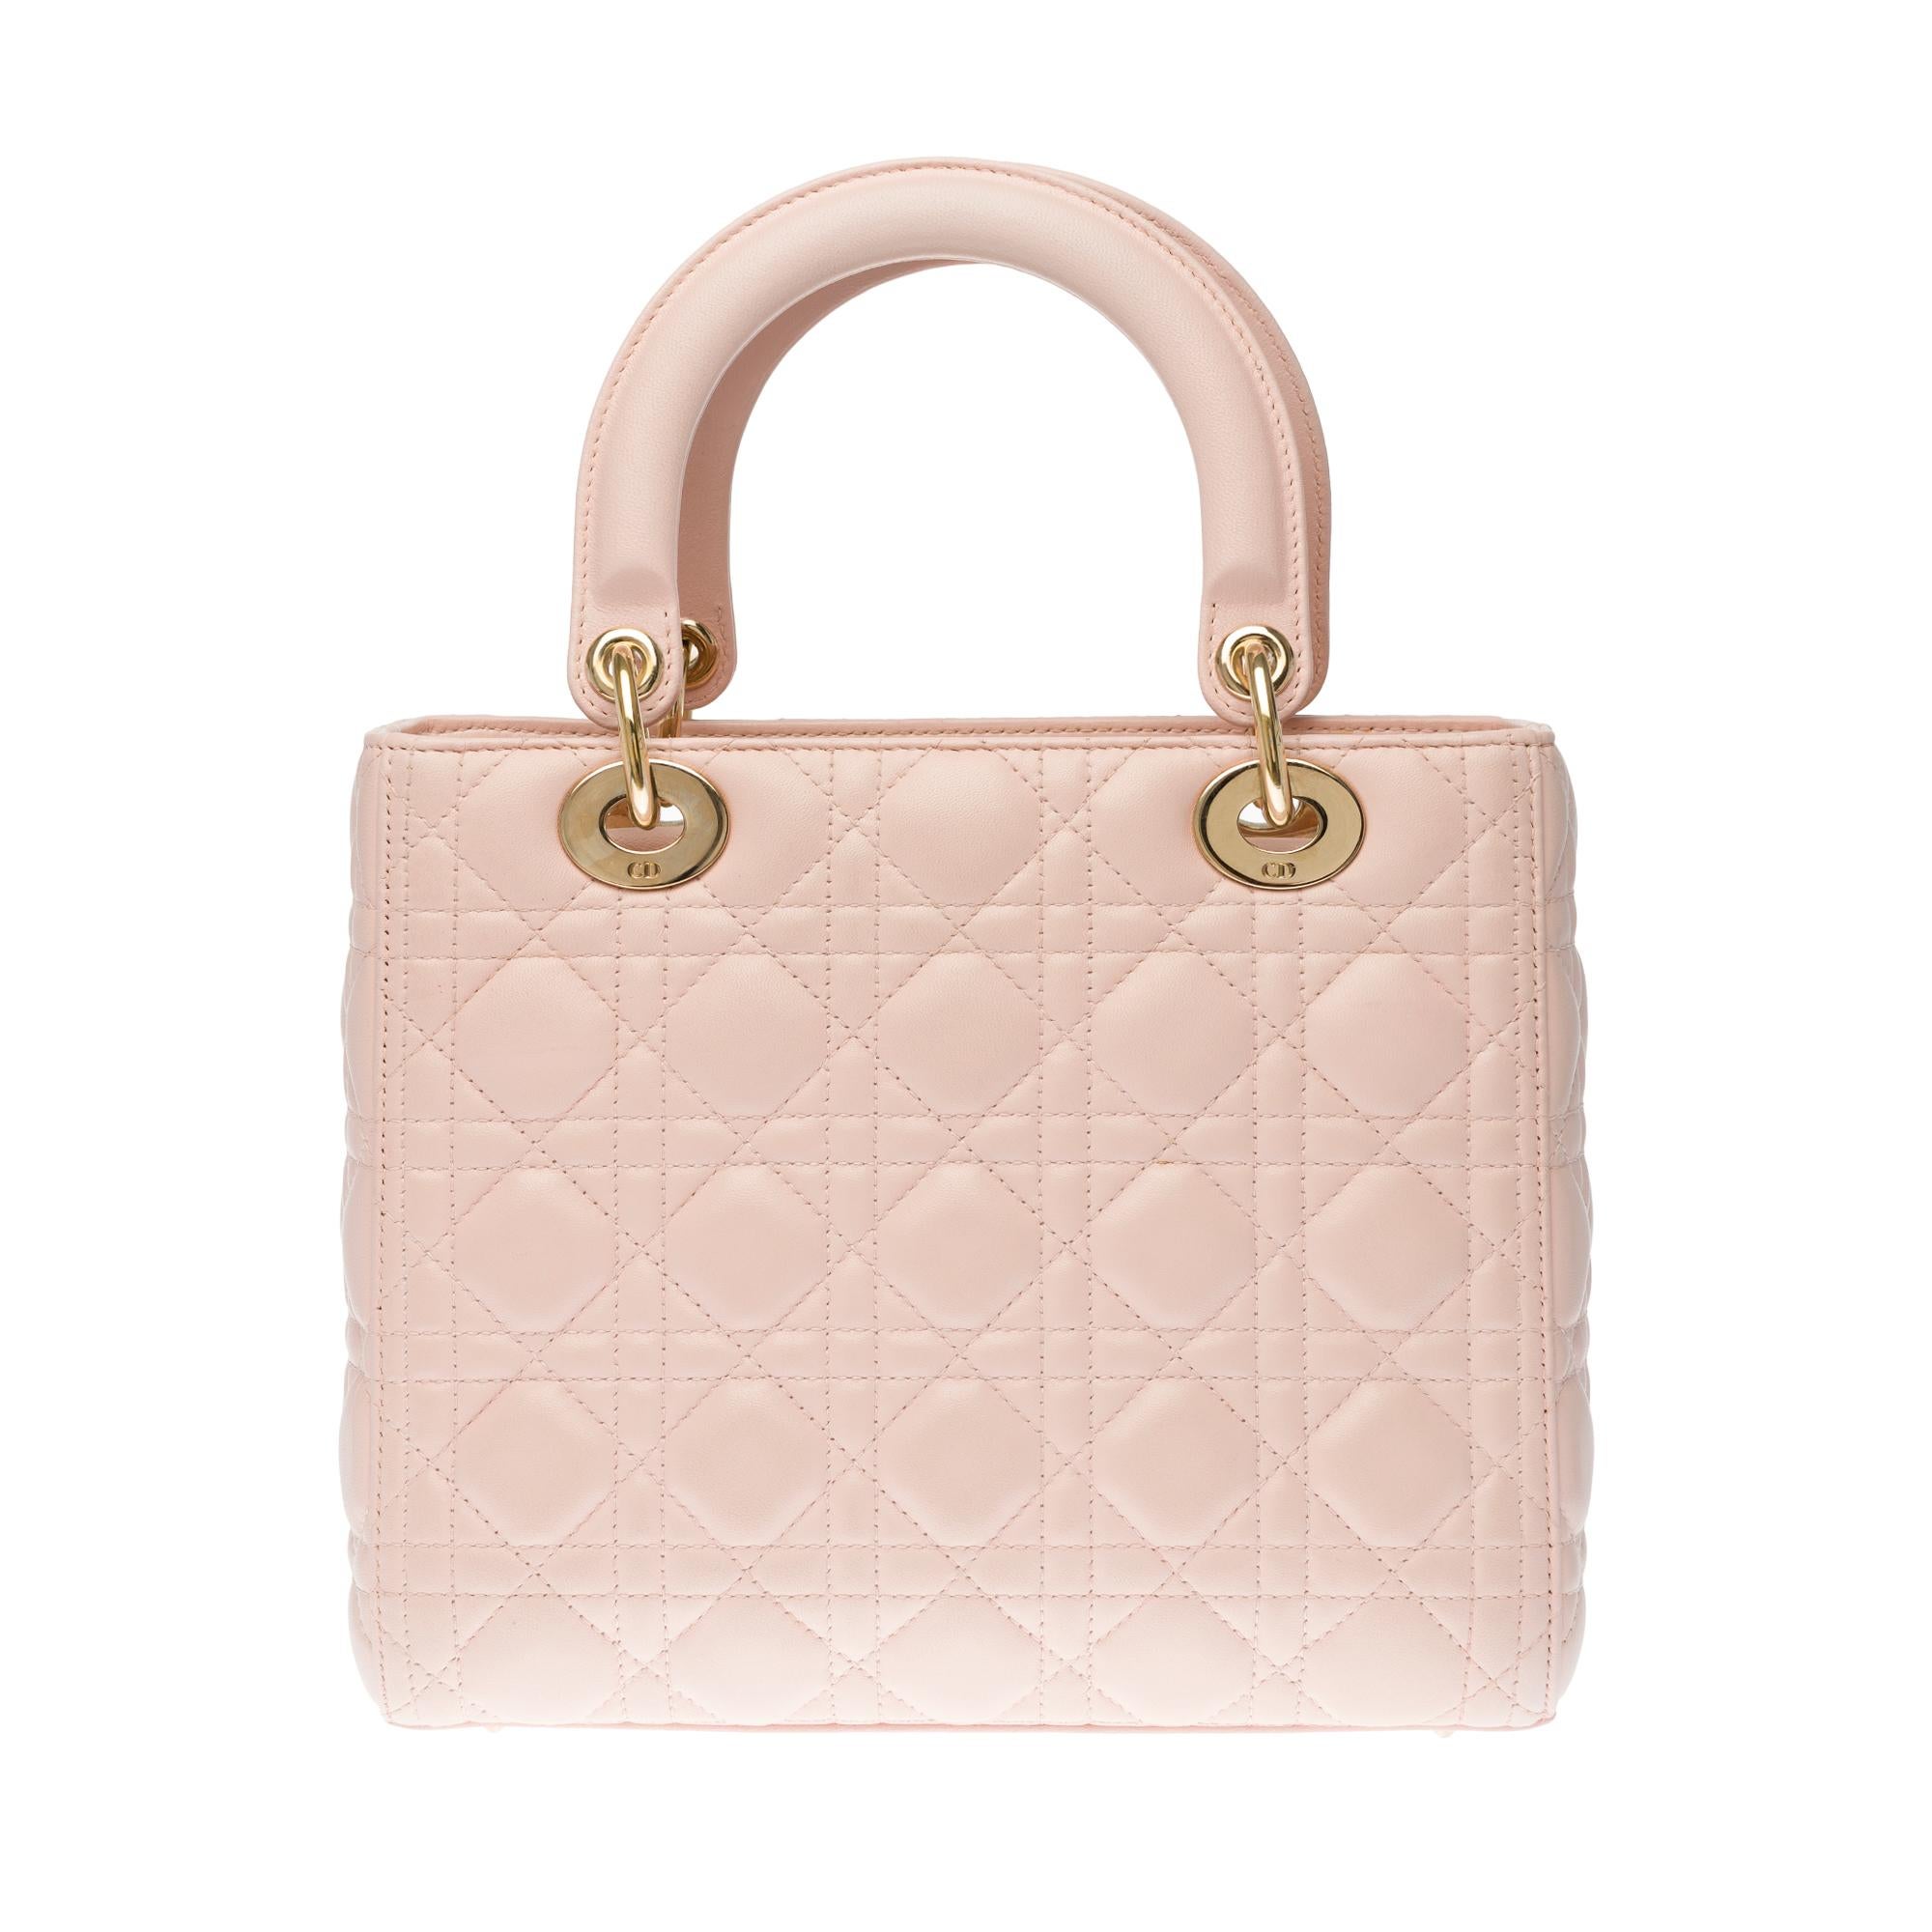 Very chic shoulder bag Dior Lady Dior medium model in pink cannage leather, gold-tone metal hardware, double handle in pink leather, removable shoulder strap handle in pink leather allowing a hand or shoulder support or shoulder strap.

It’s a zip